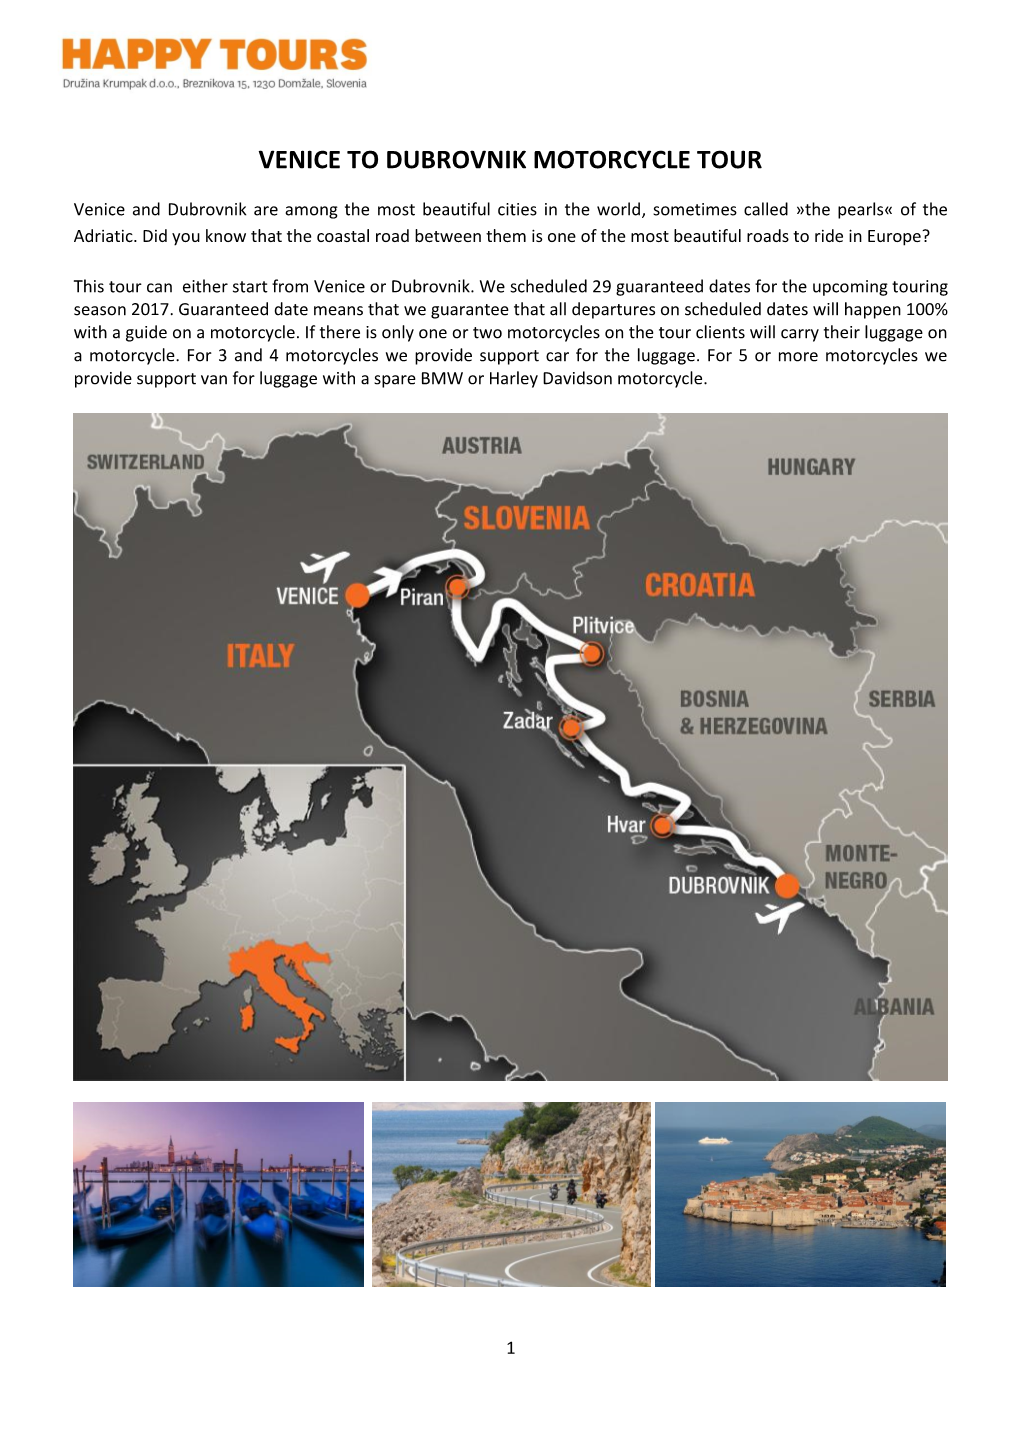 Happy Tours – Venice to Dubrovnik Motorcycle Tour